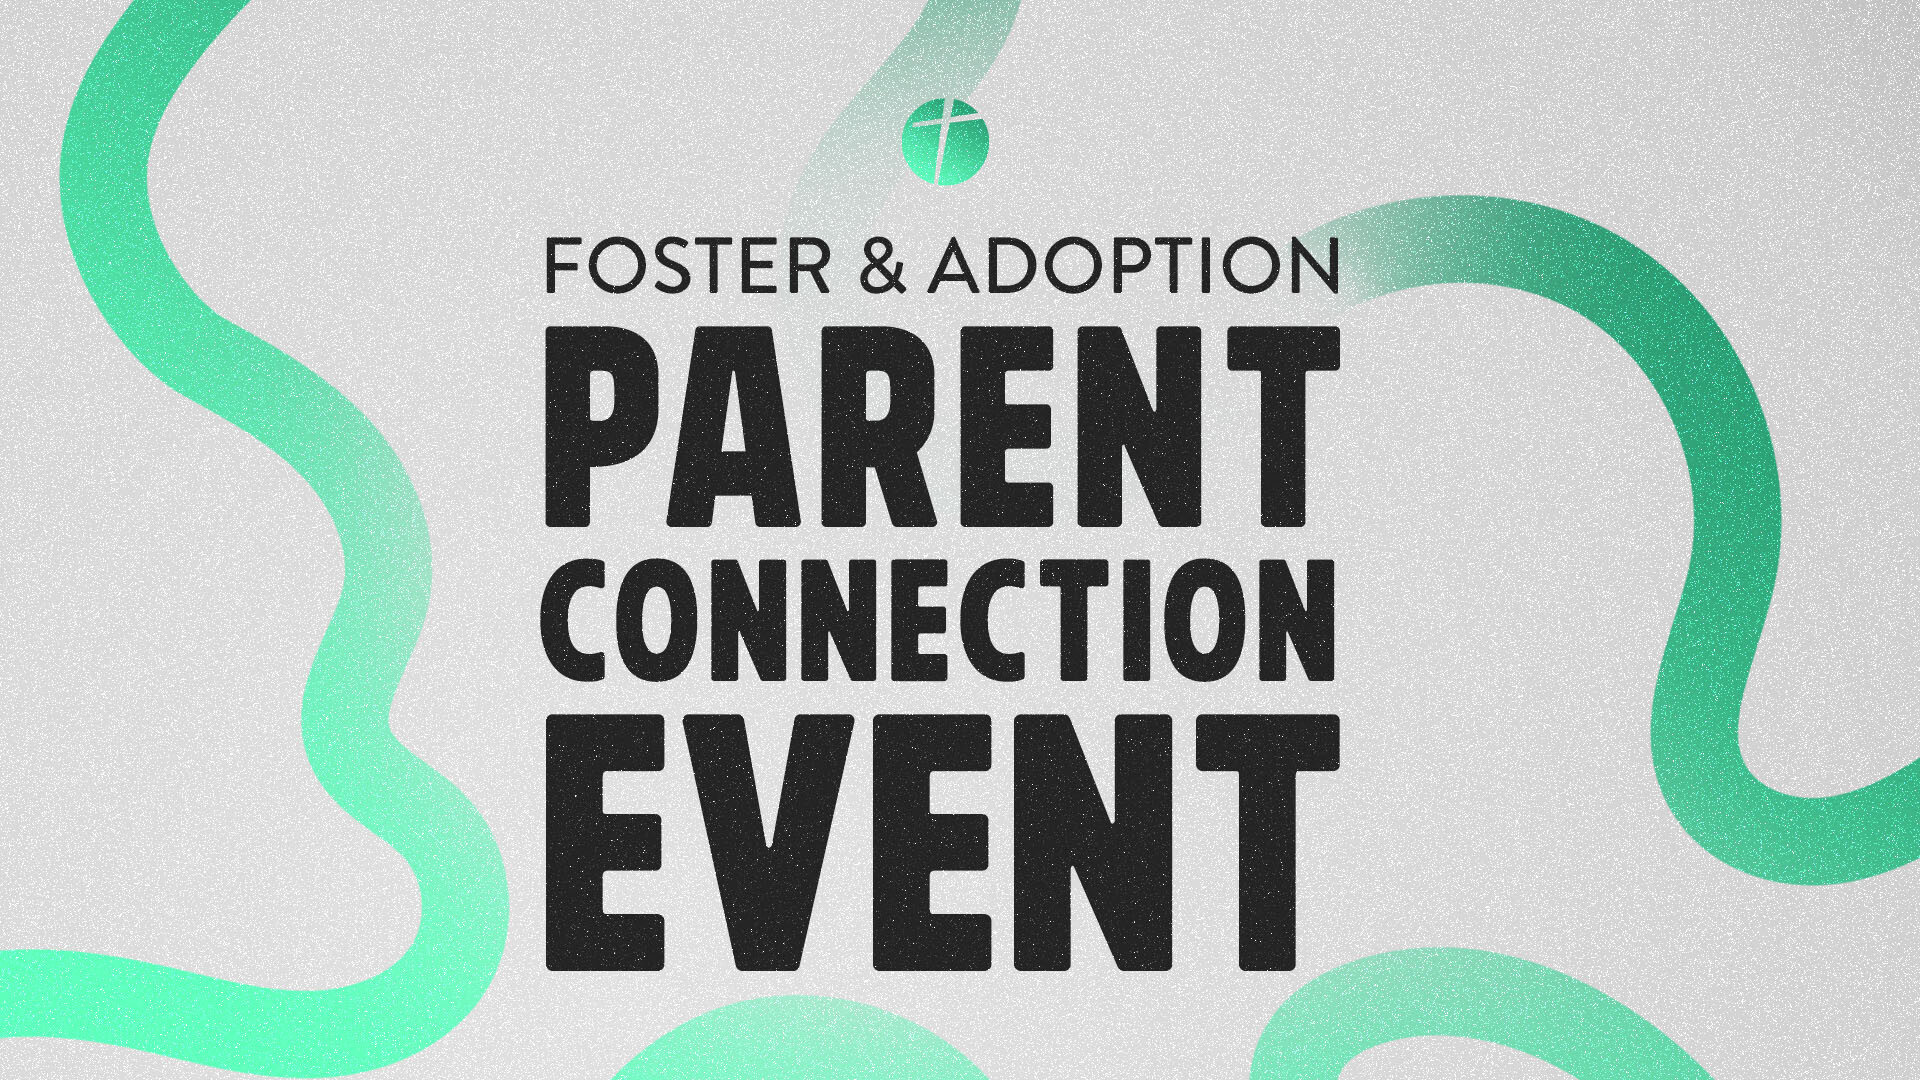 Foster and Adoption Parent Connection Event